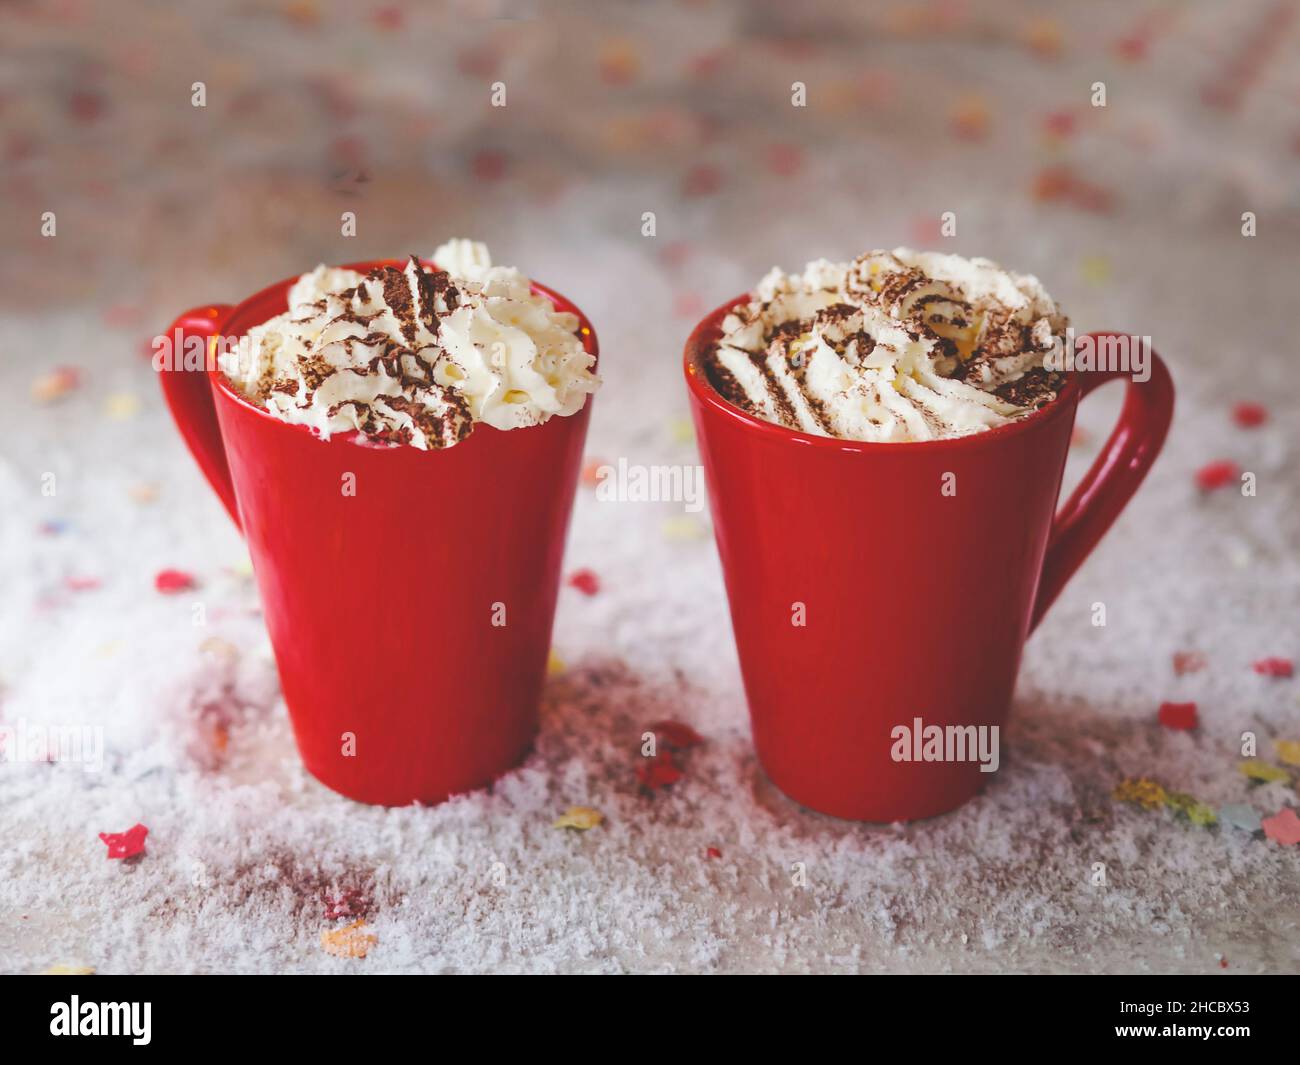 Two red mugs with hot chocolate and whipped cream on table with snow. Cozy warm drinks at home with sweet cream. Front view. Stock Photo